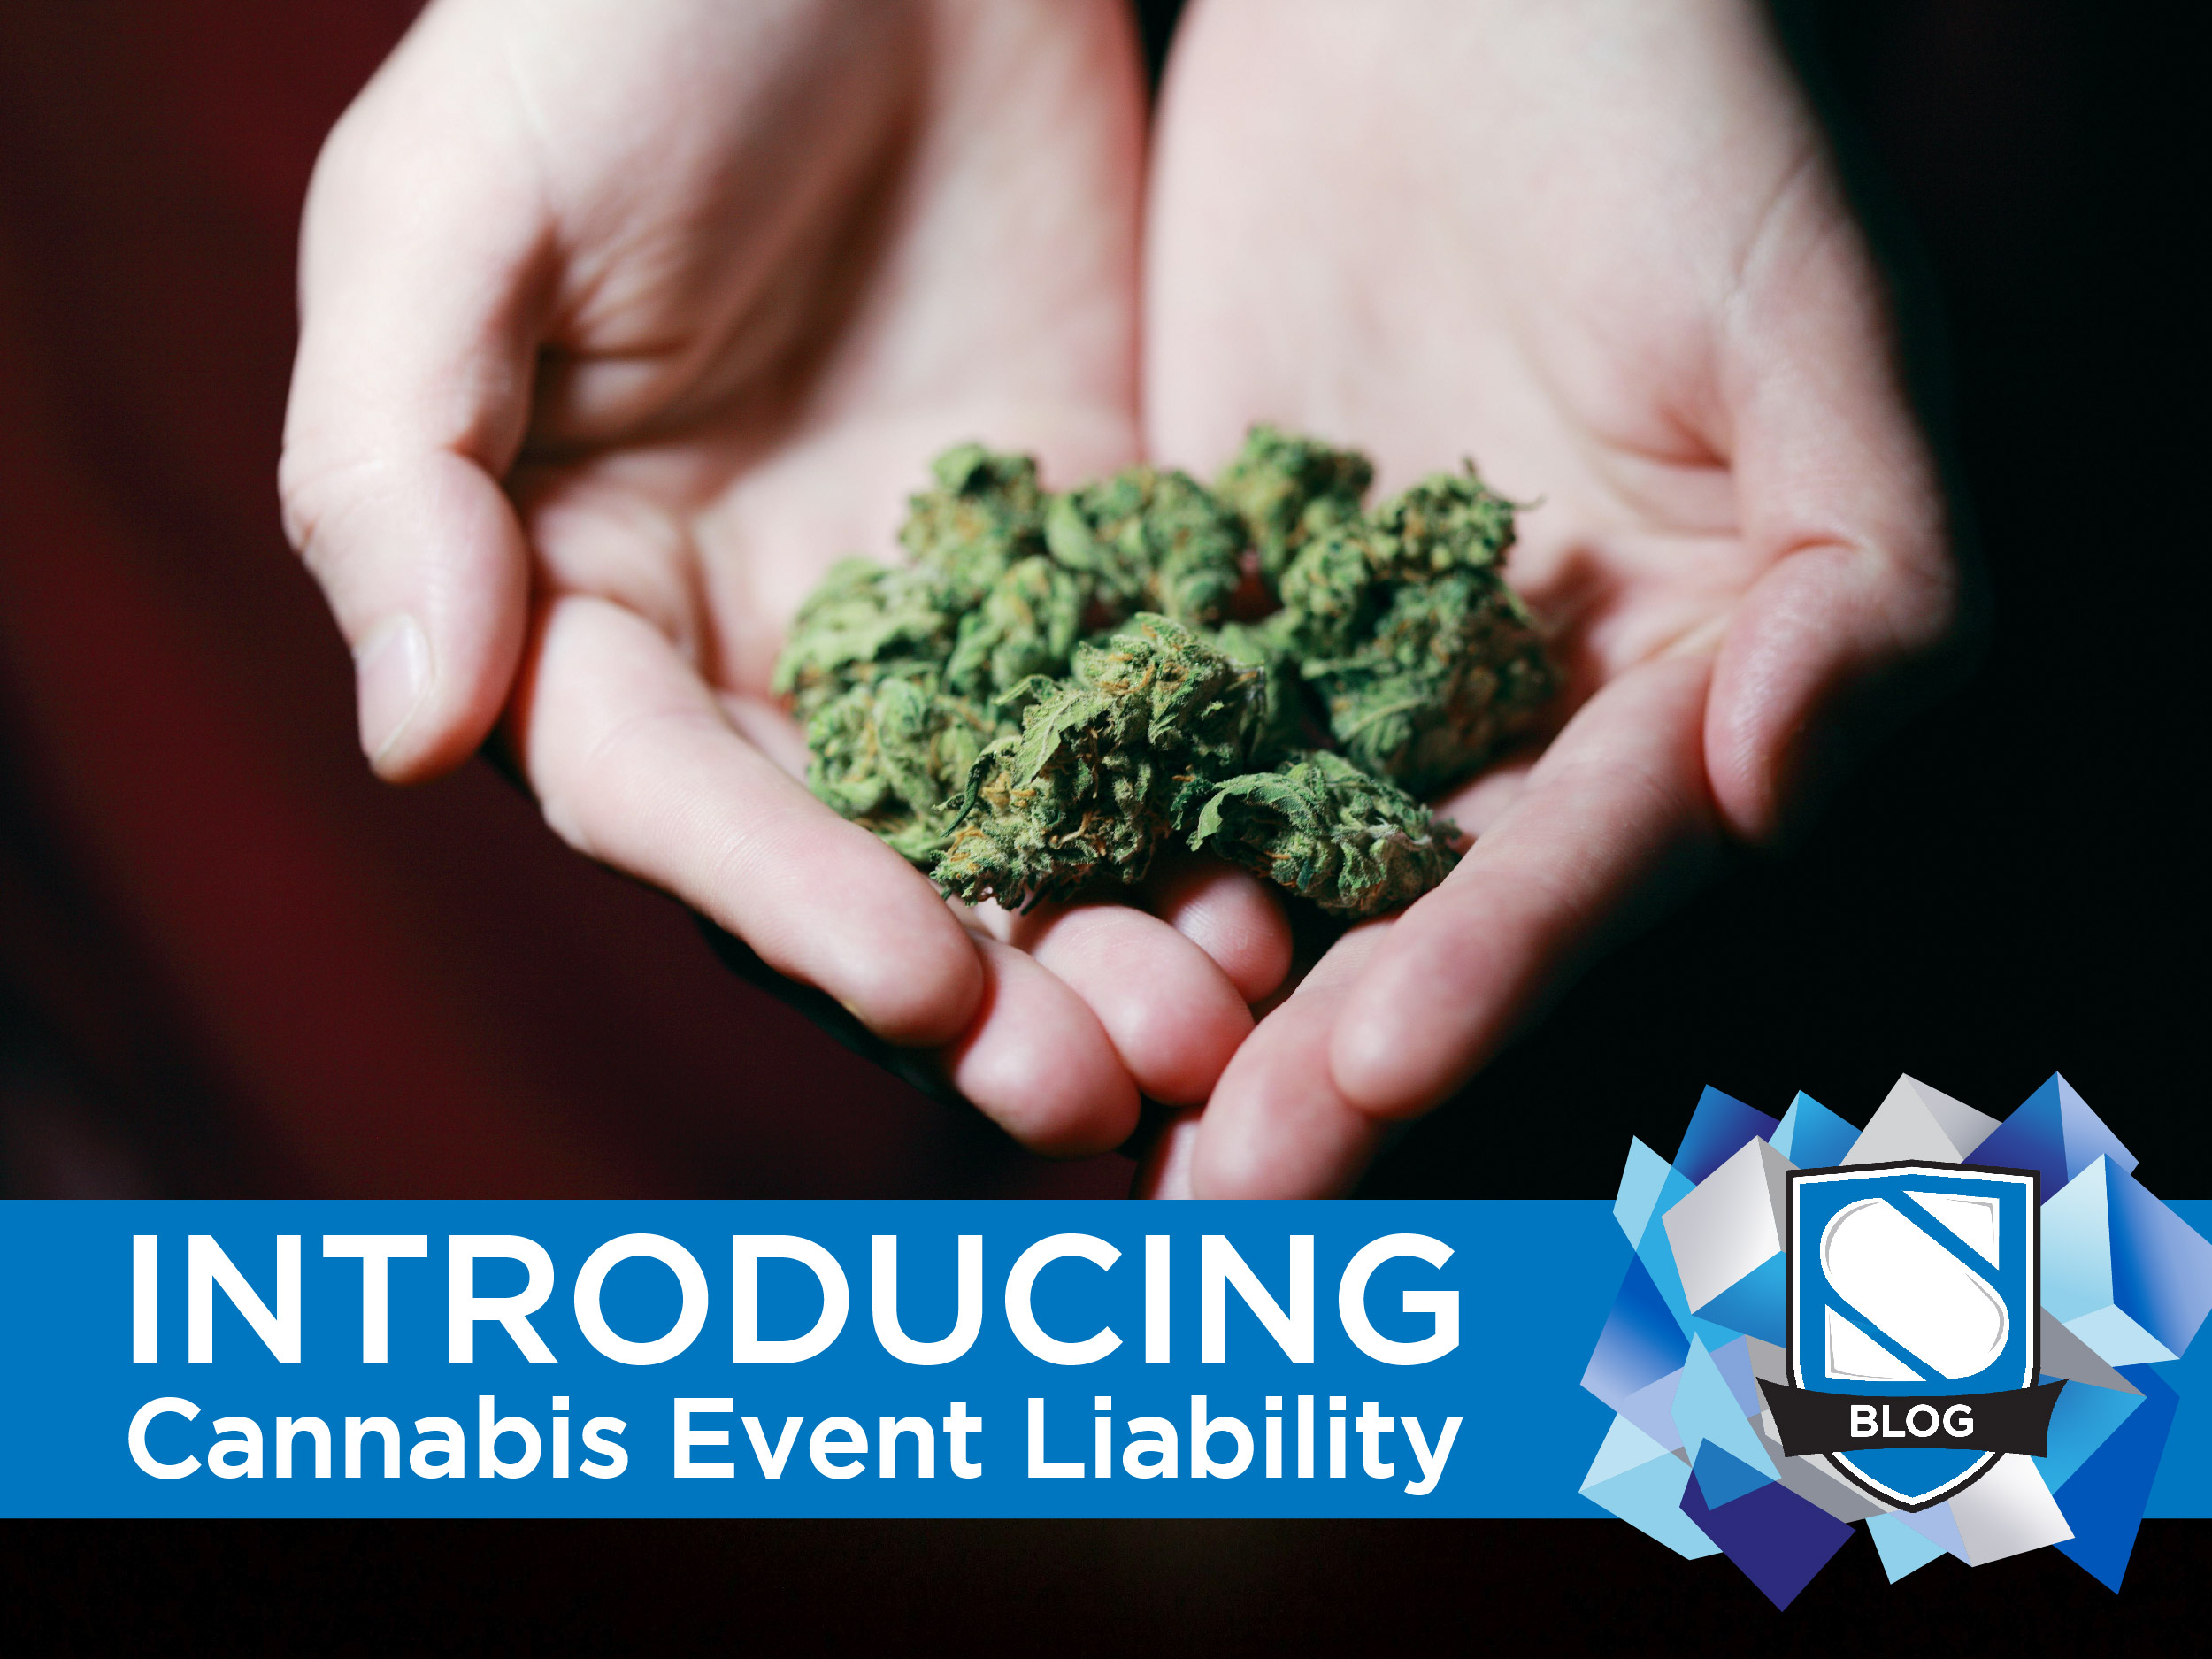 NOW AVAILABLE: Cannabis Event Liability Insurance